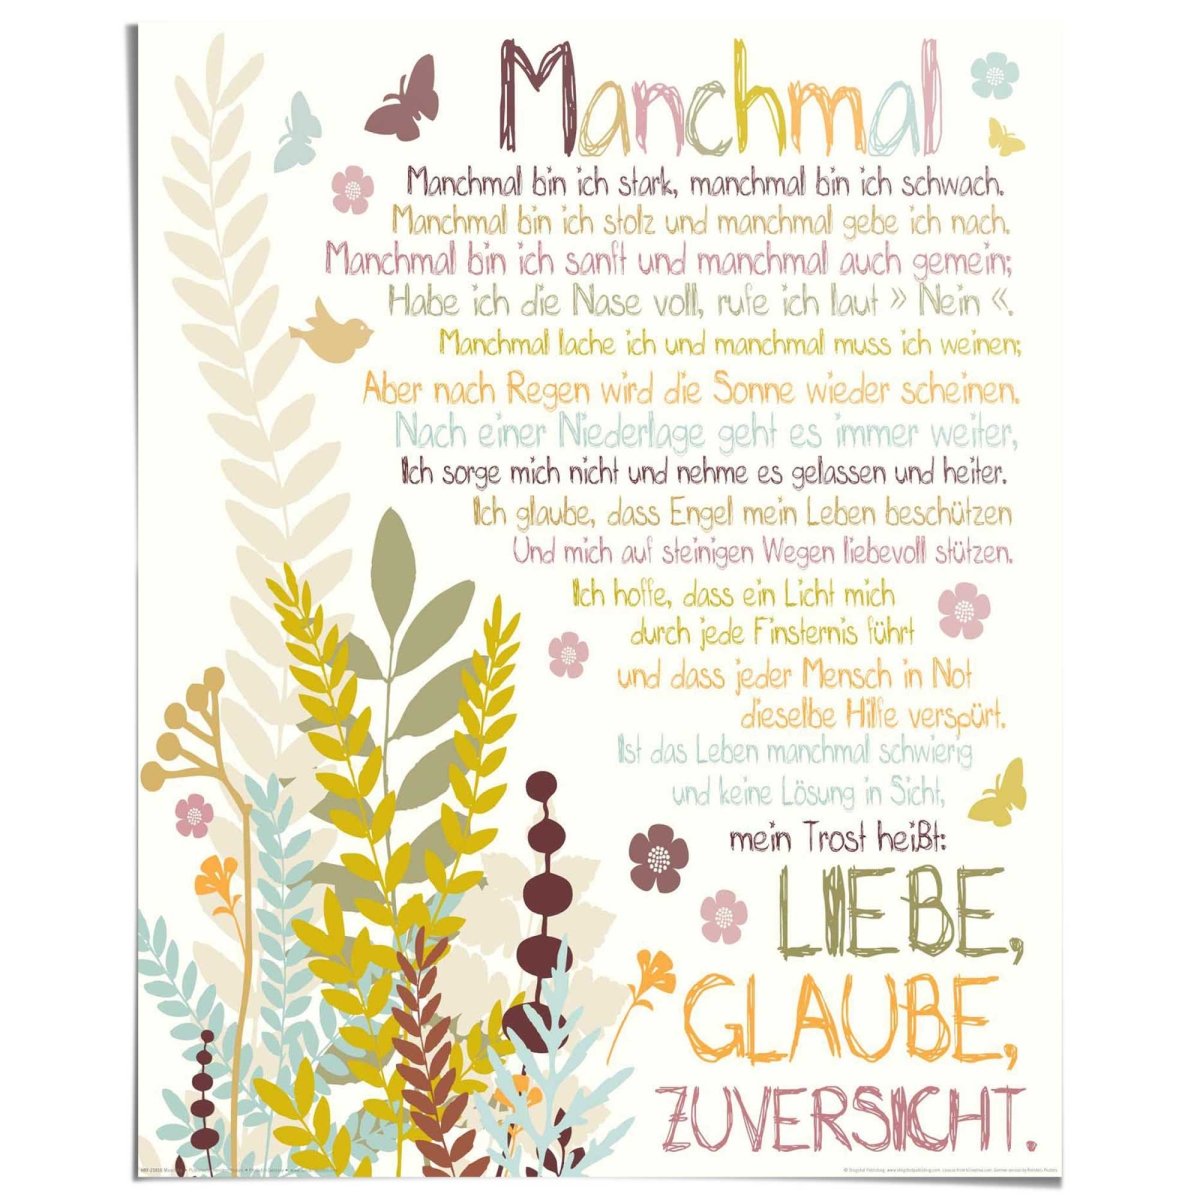 Poster Manchmal 50x40 - Reinders